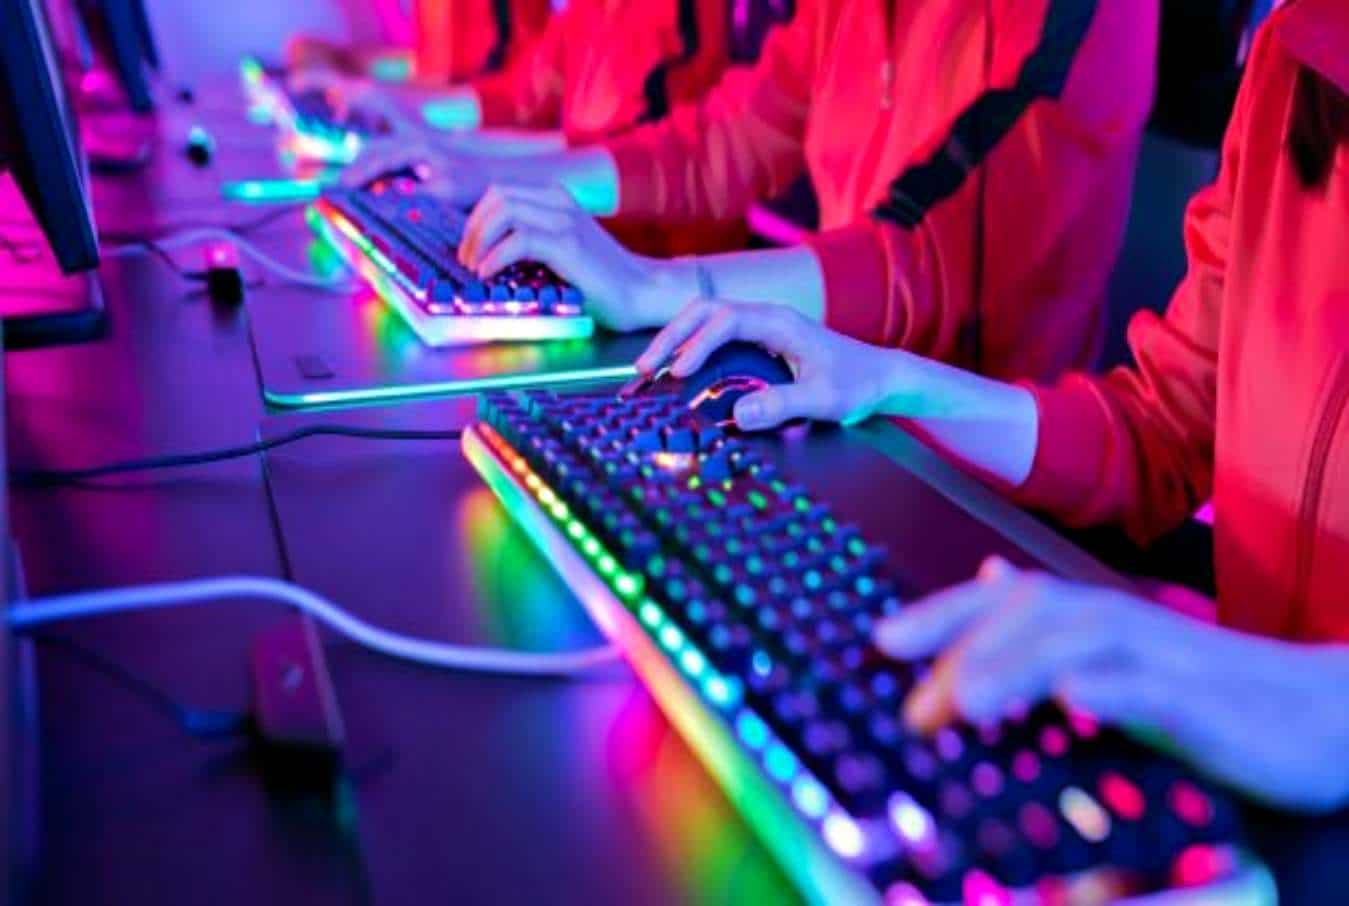 How gamers should secure their accounts from cyber attacks